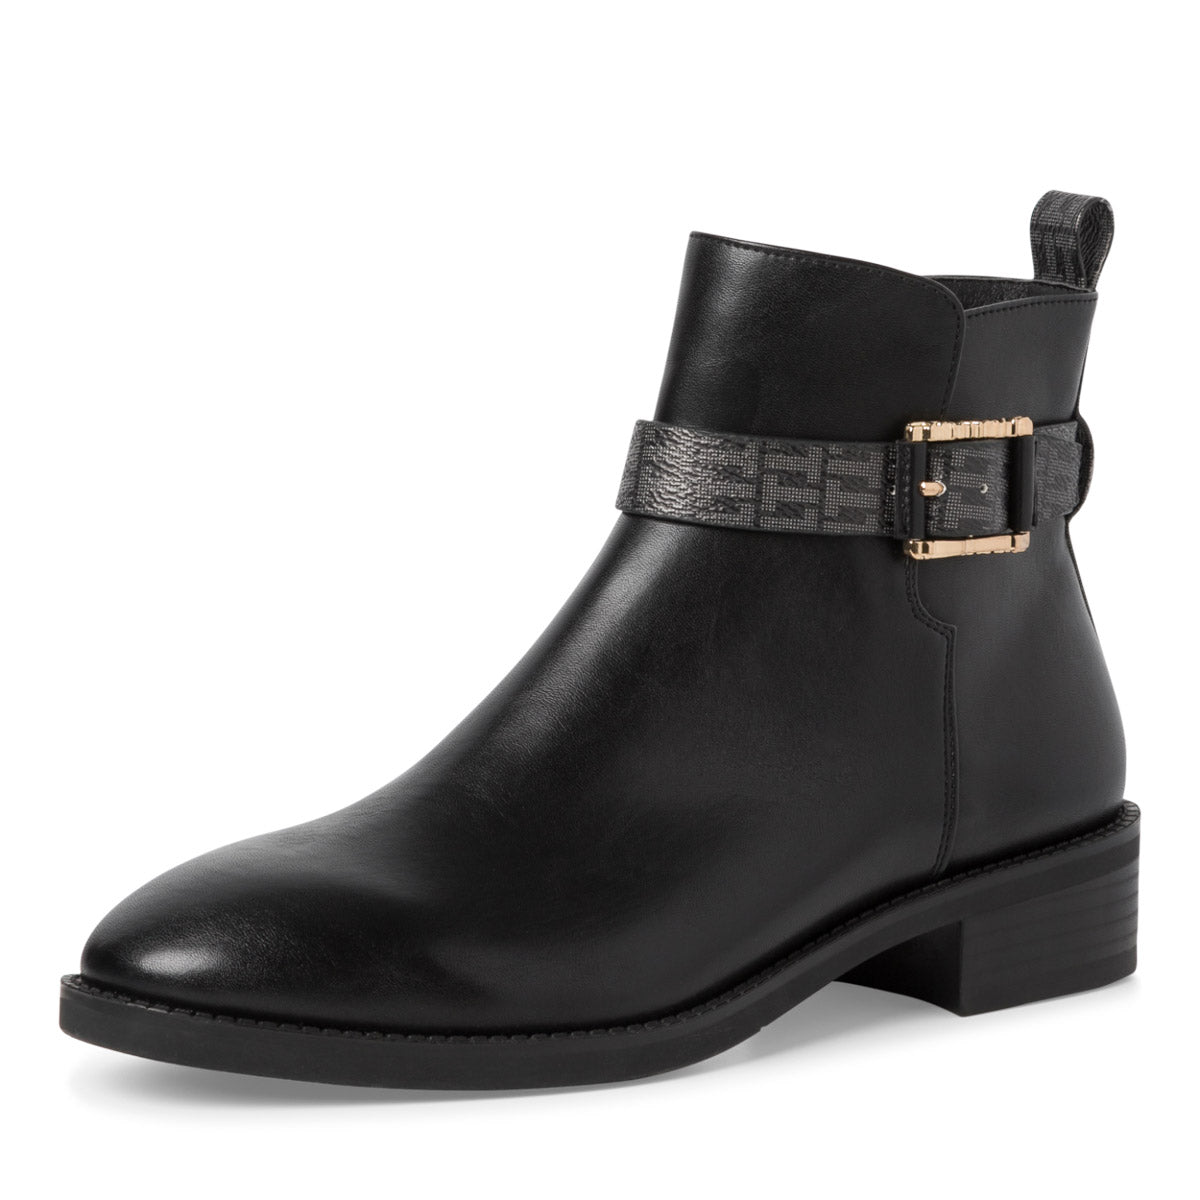 Angled view of the Tamaris Wrapped Strap Ankle Boot highlighting its smooth black finish.